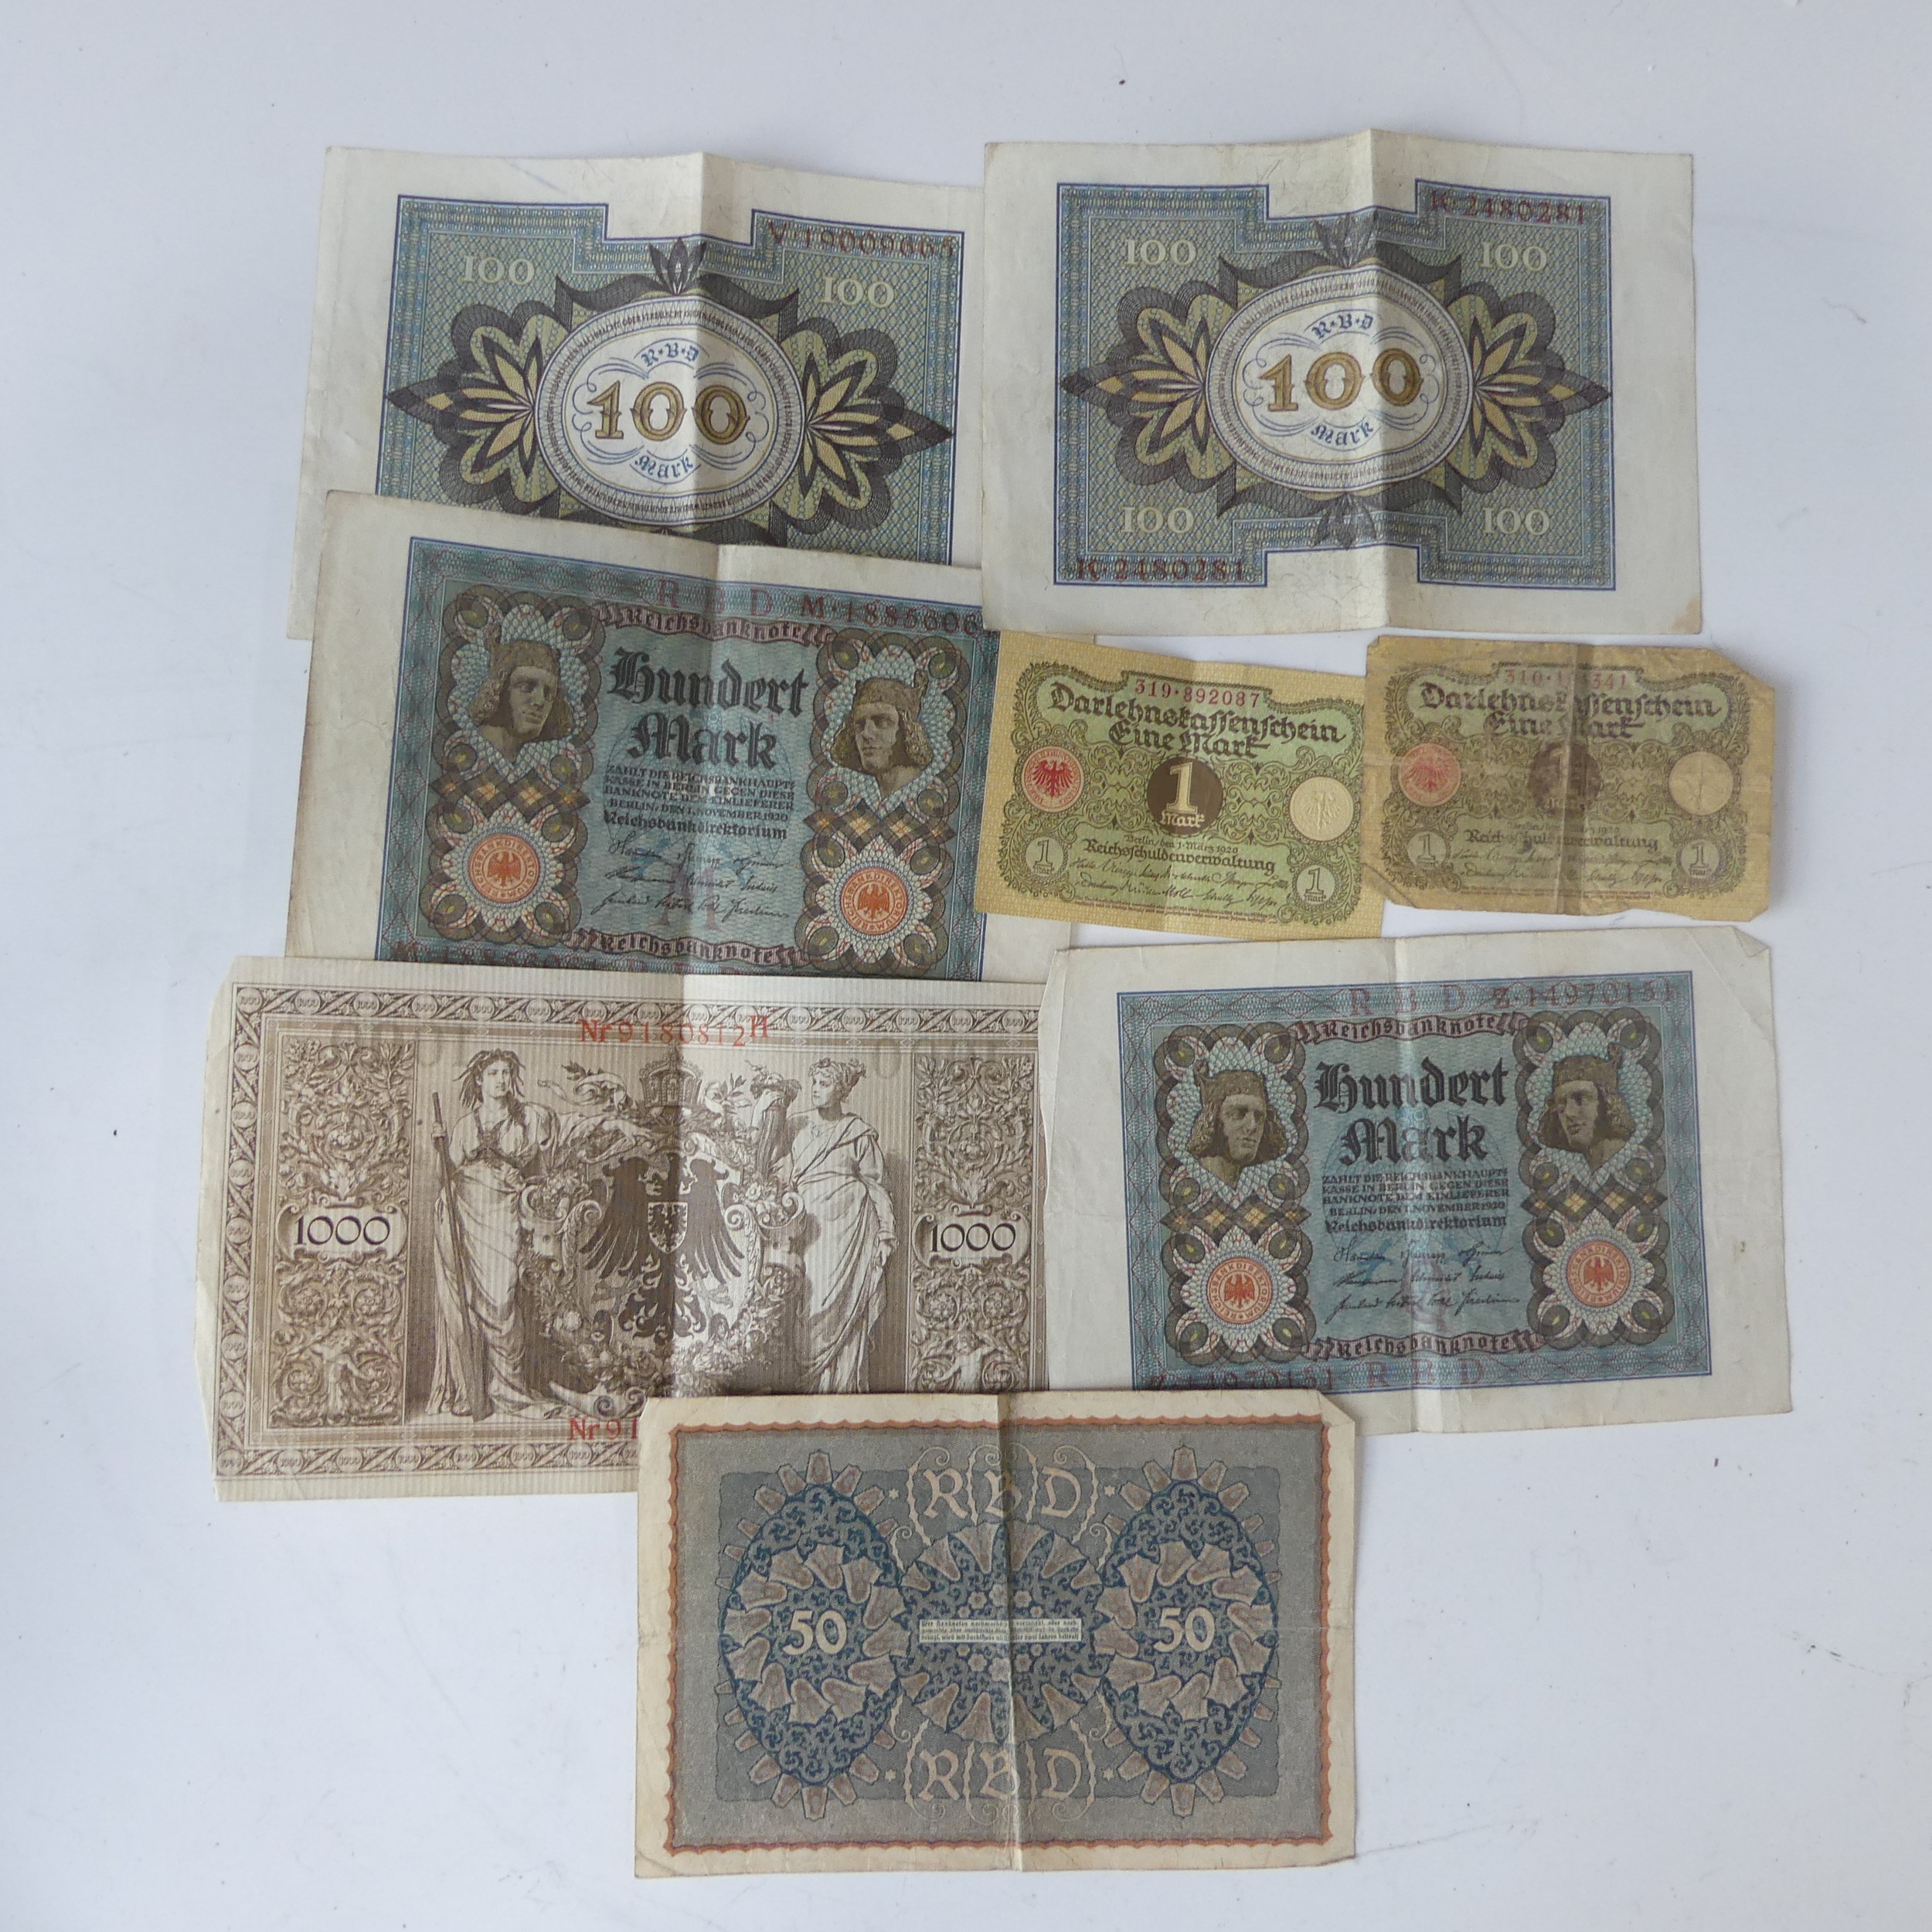 A Collection of 1920's German Reichsbanknote, consisting of two 1 mark notes dated 1920, a 50 Mark